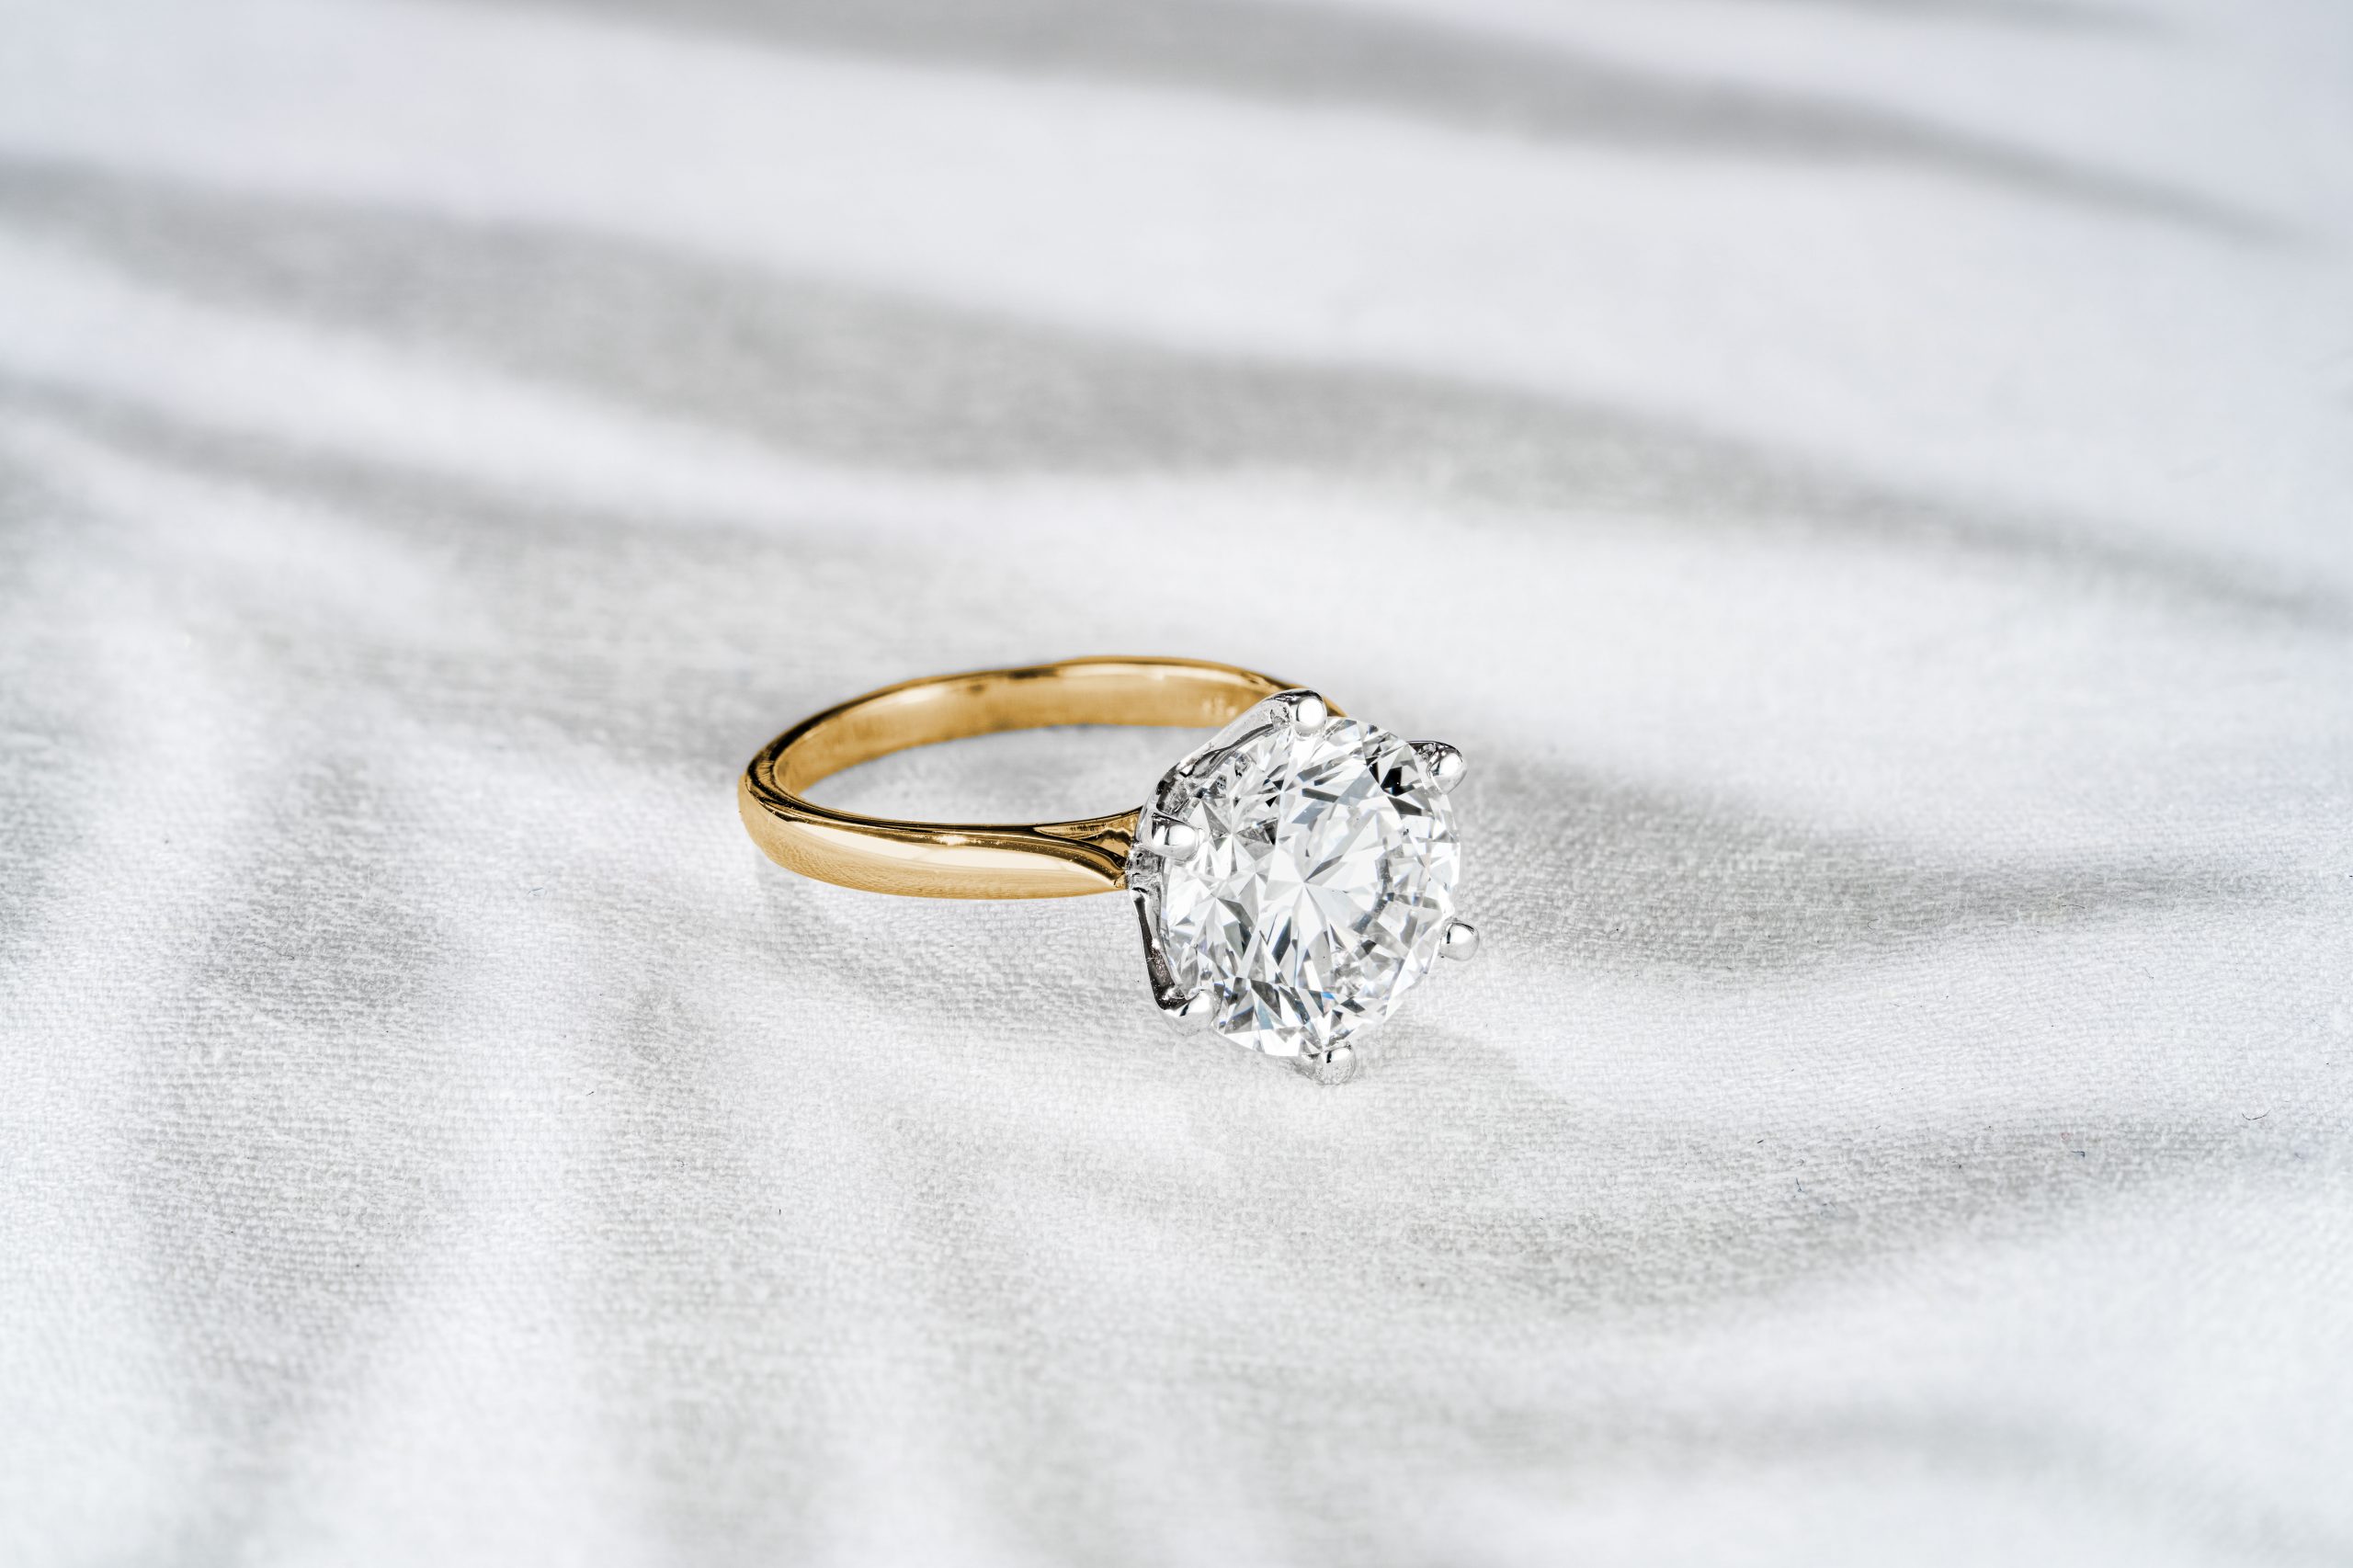 Engagement Ring Resizing: Everything You Need to Know